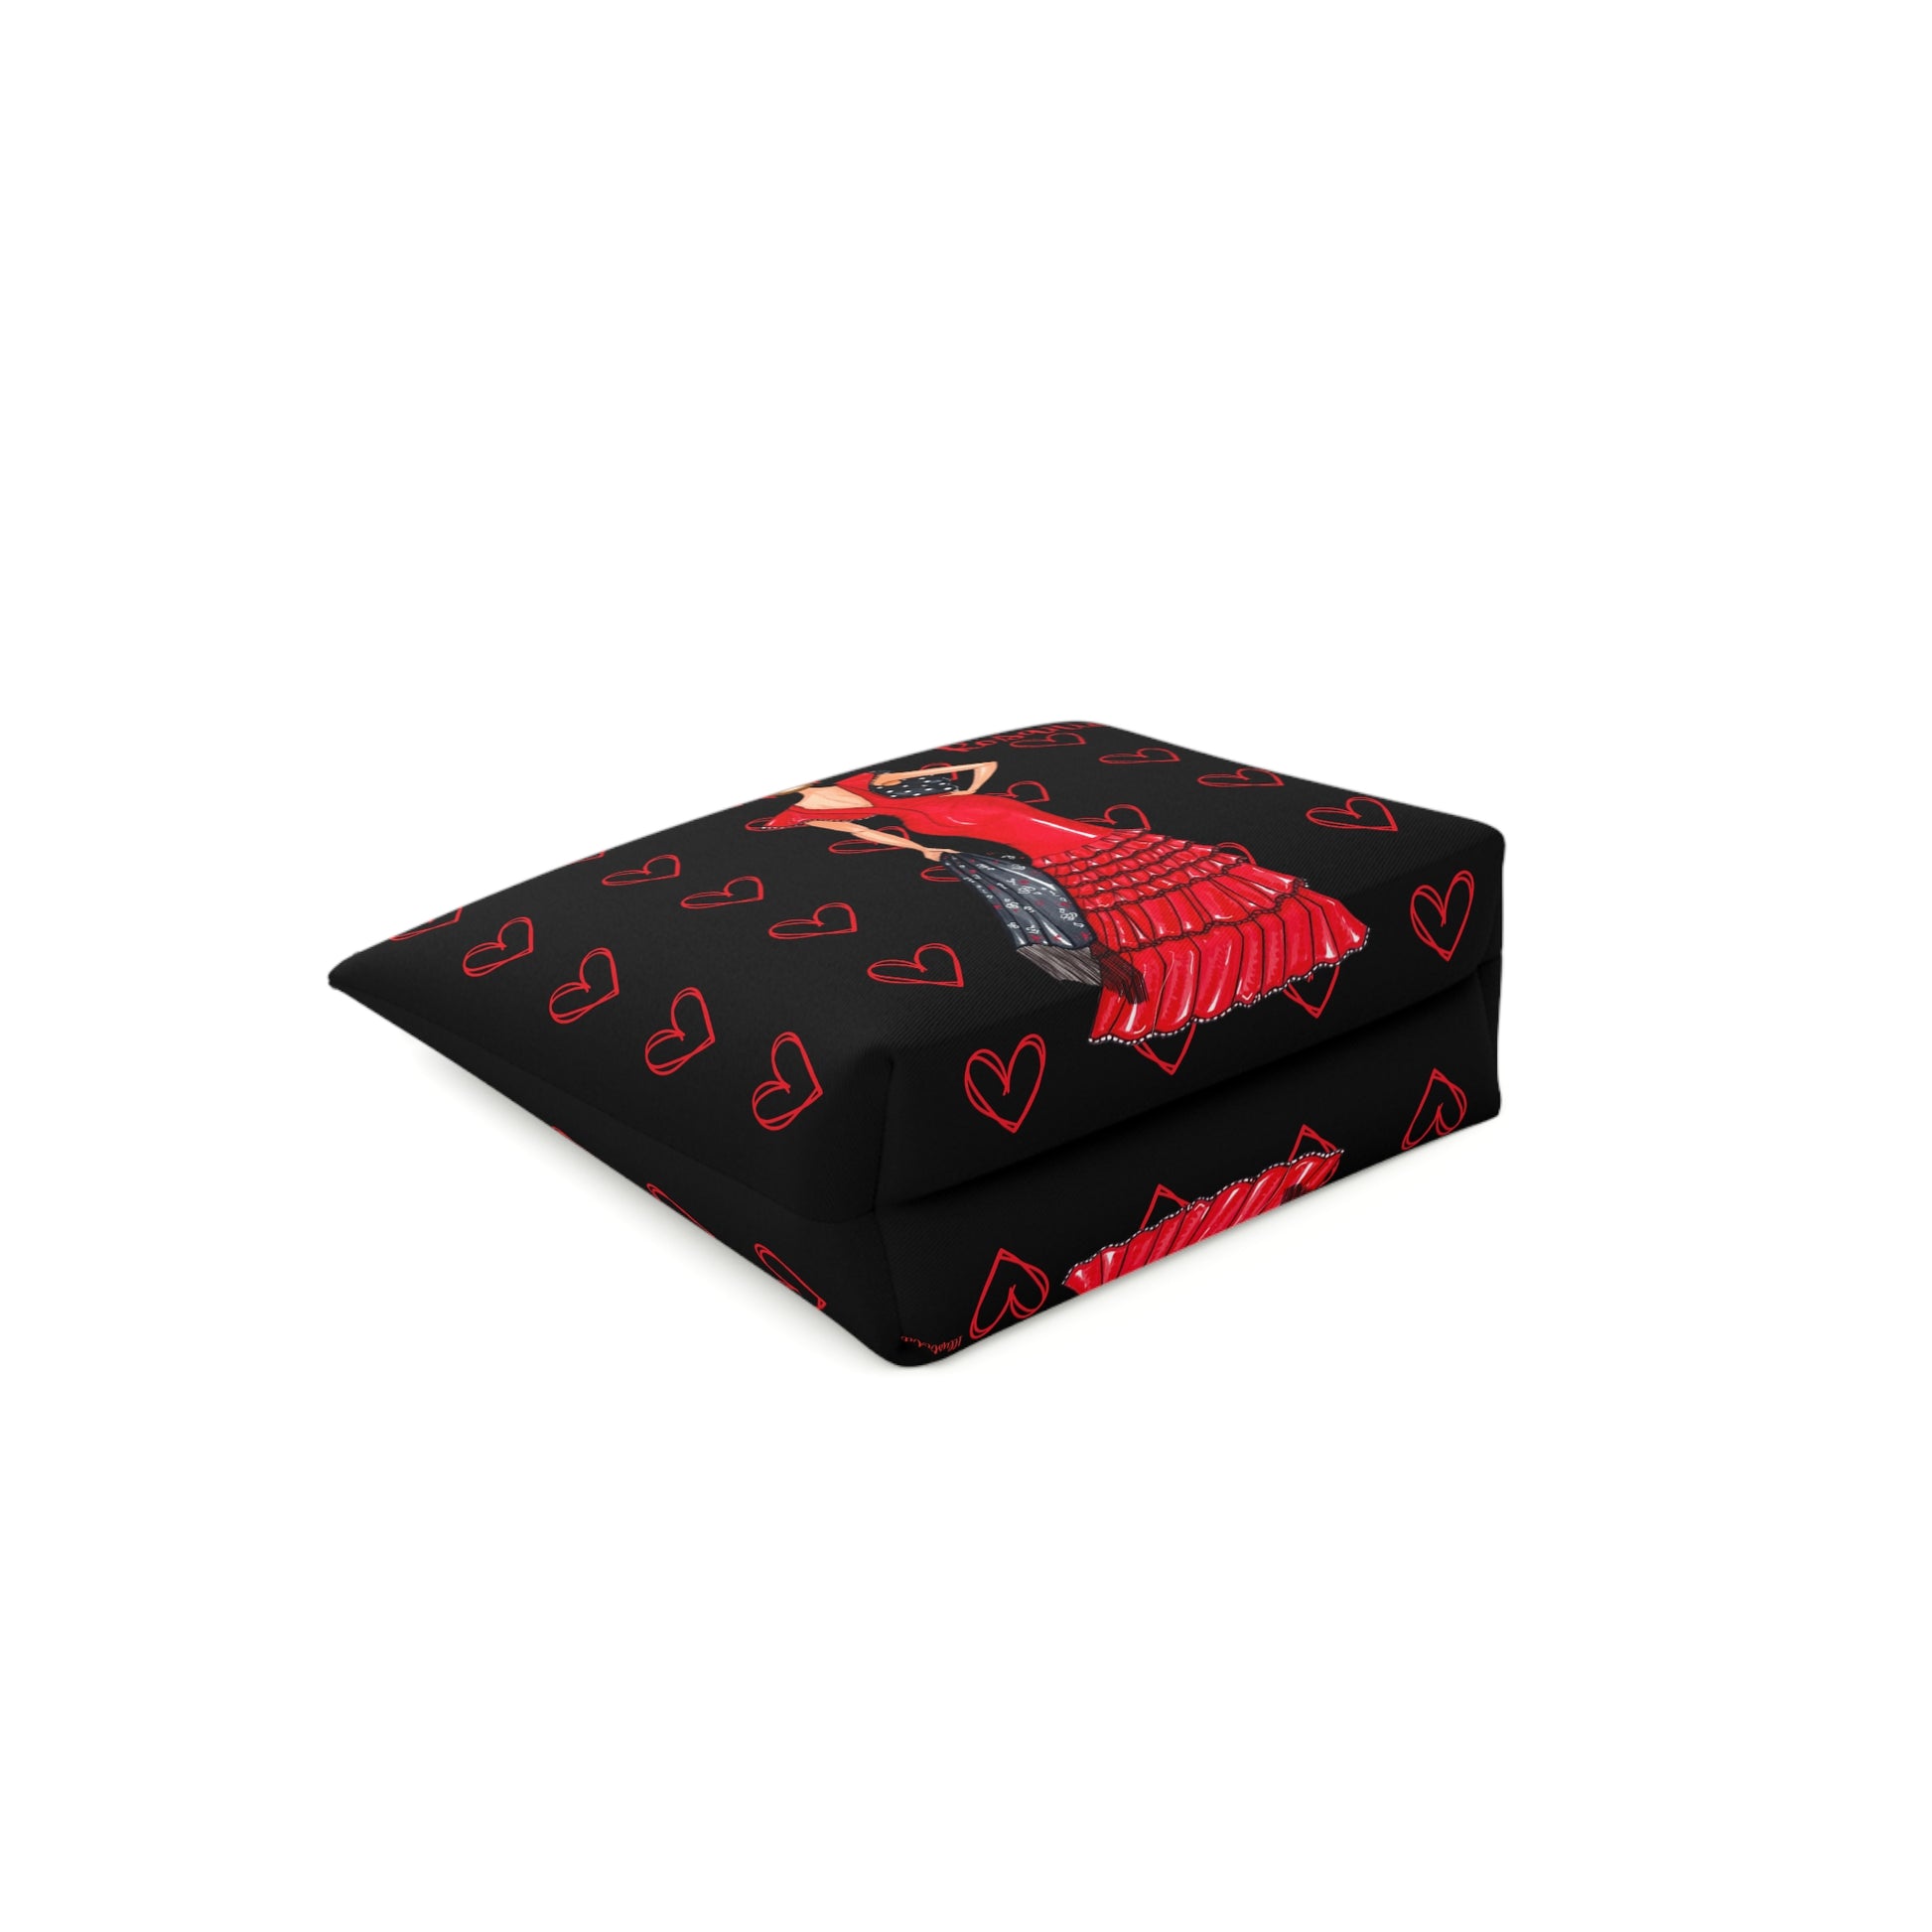 a black and red blanket with a red bird on it